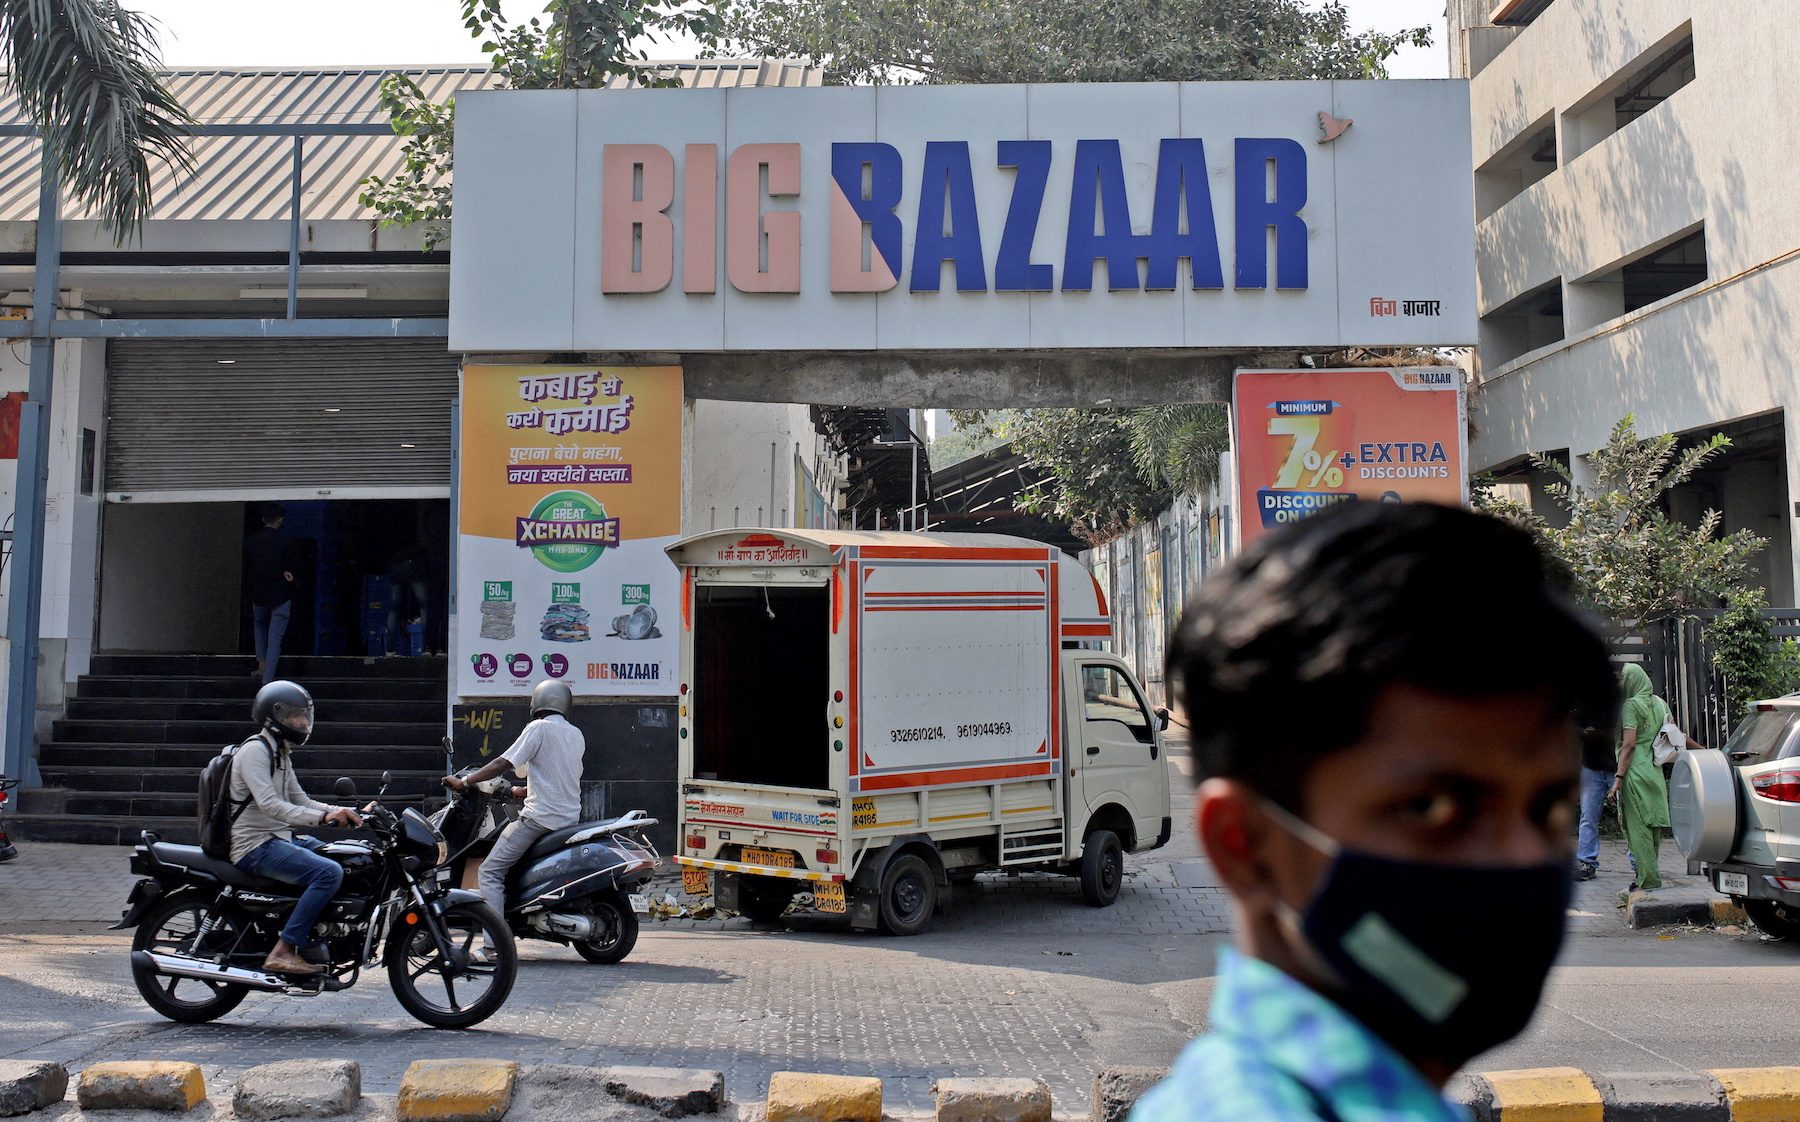 ‘The shops are gone’: How Reliance stunned Amazon in battle for India’s Future Retail